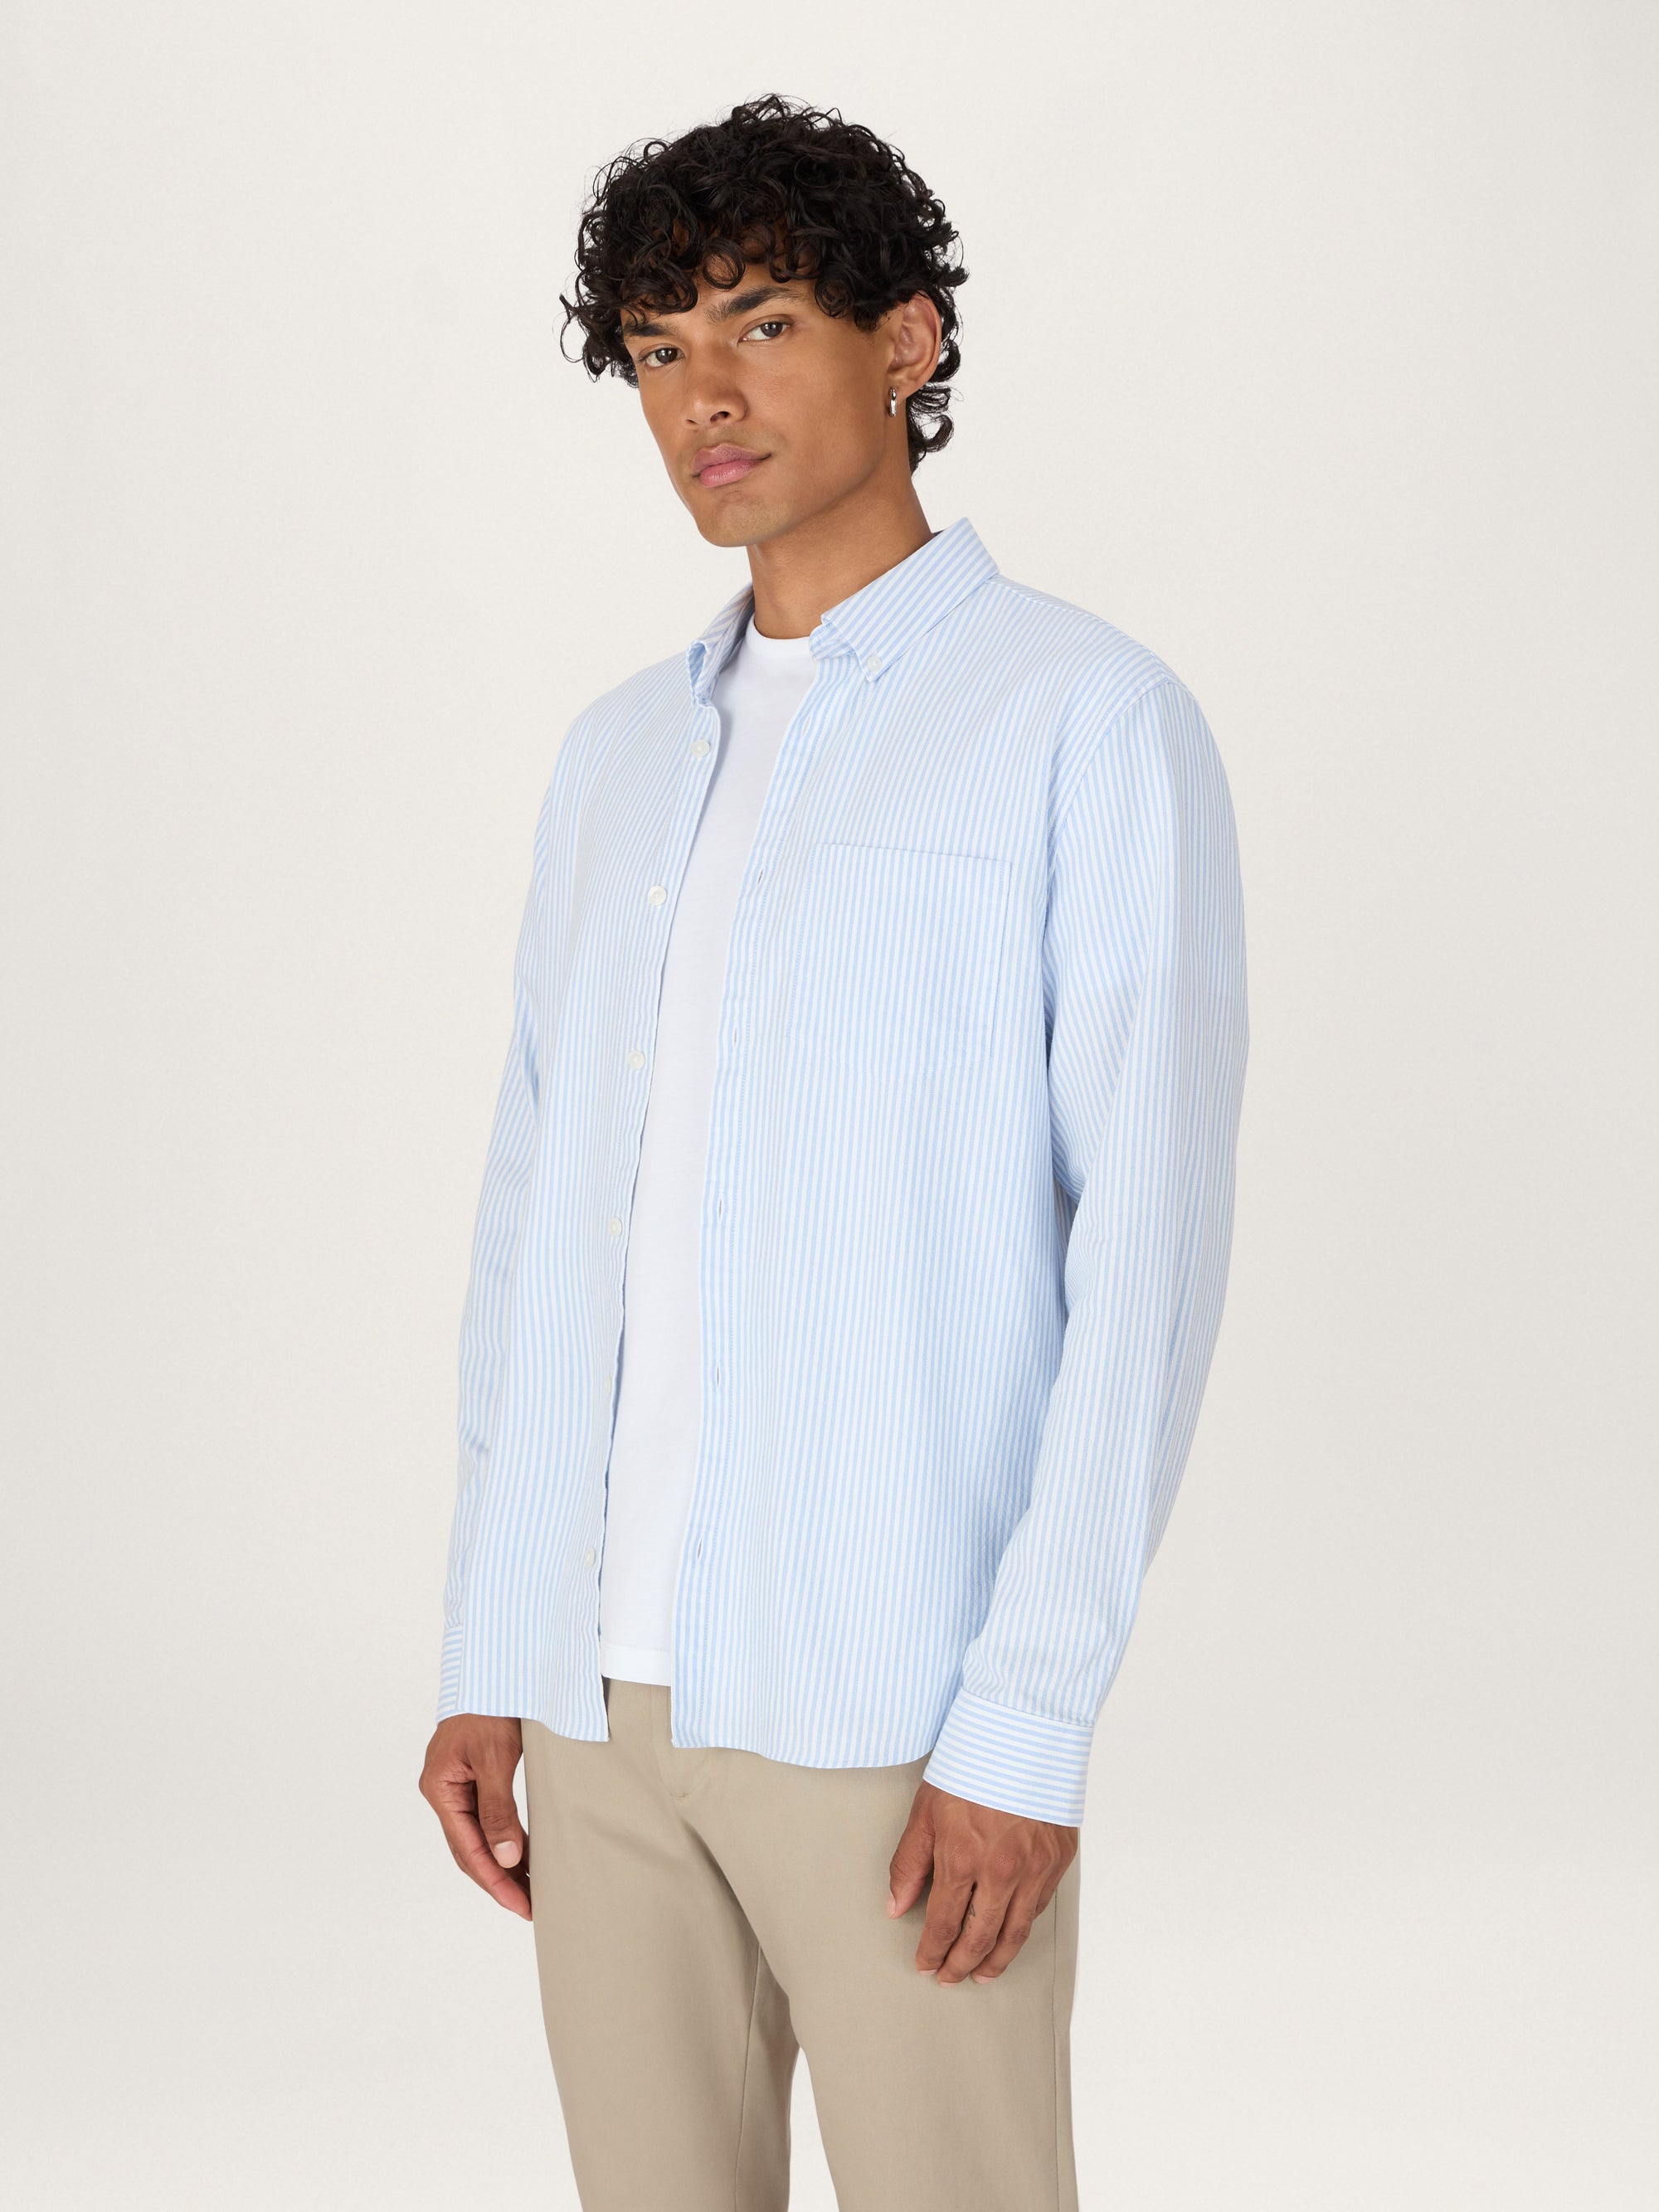 The All Day Oxford Shirt || Blue Stripe | Stretch Cotton